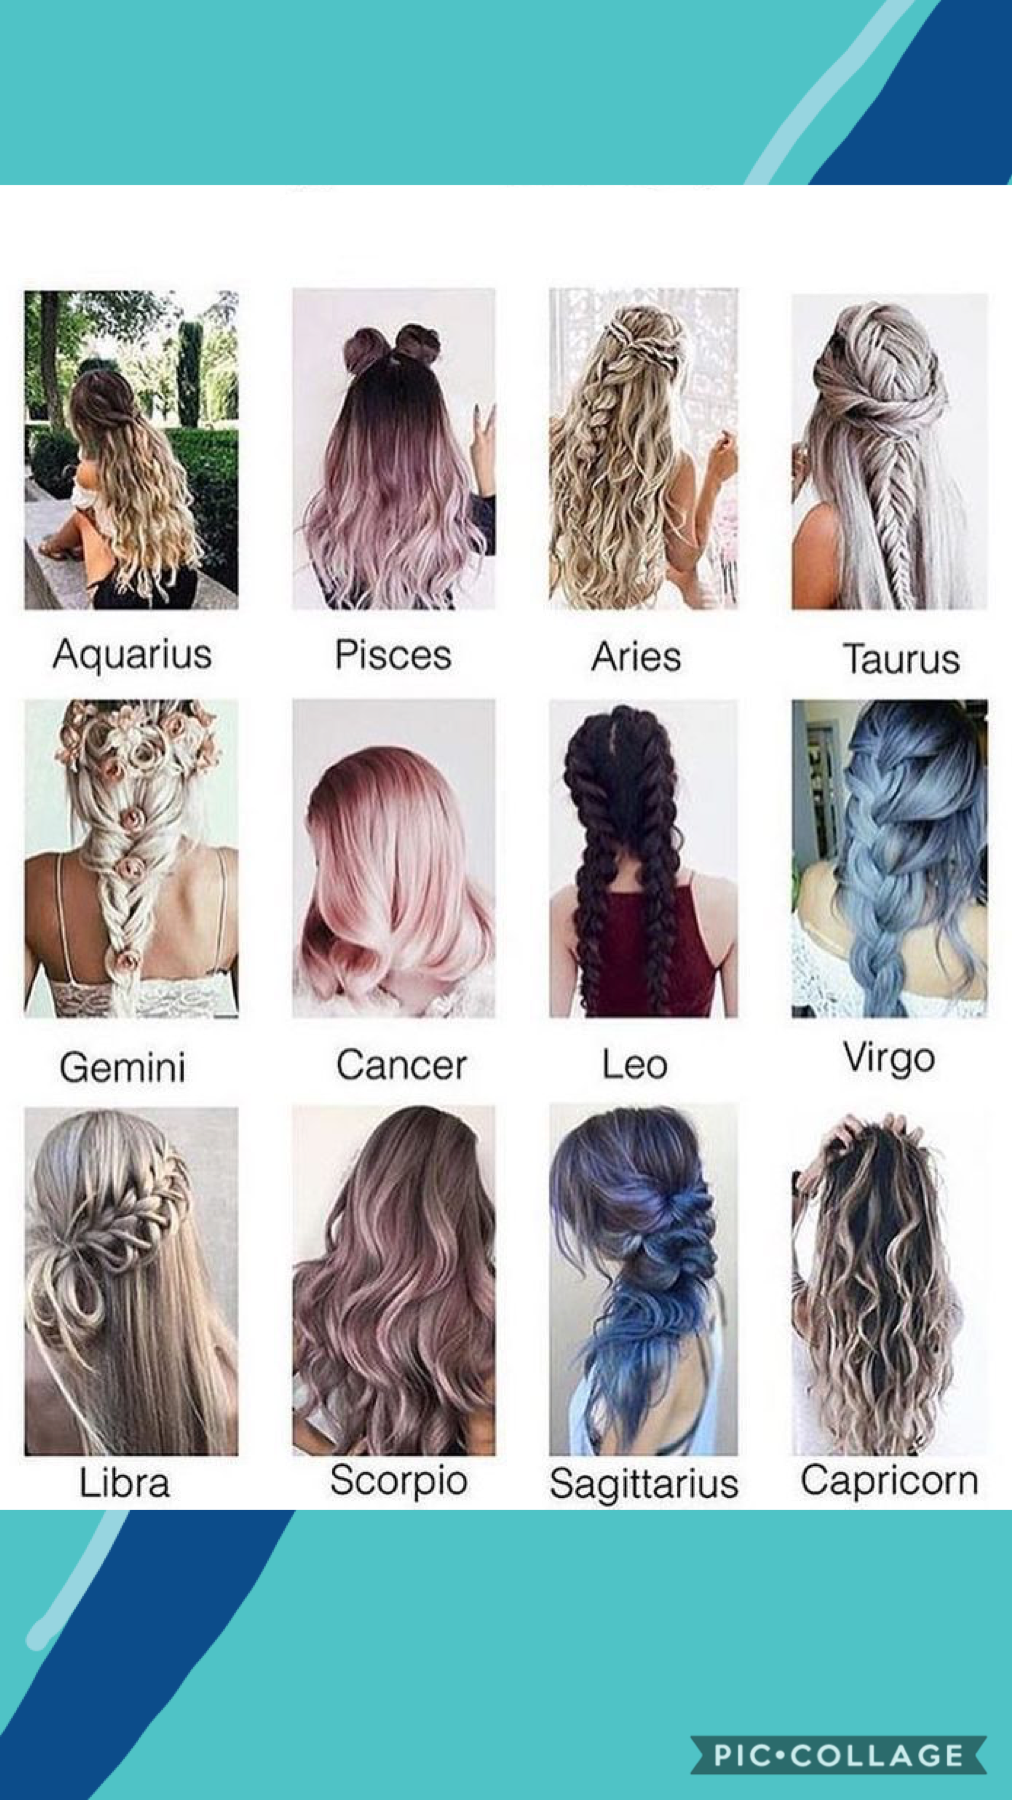 What is your hairstyle?? Does it match your Zodiac signs hairstyle or not?🤷🏻‍♀️